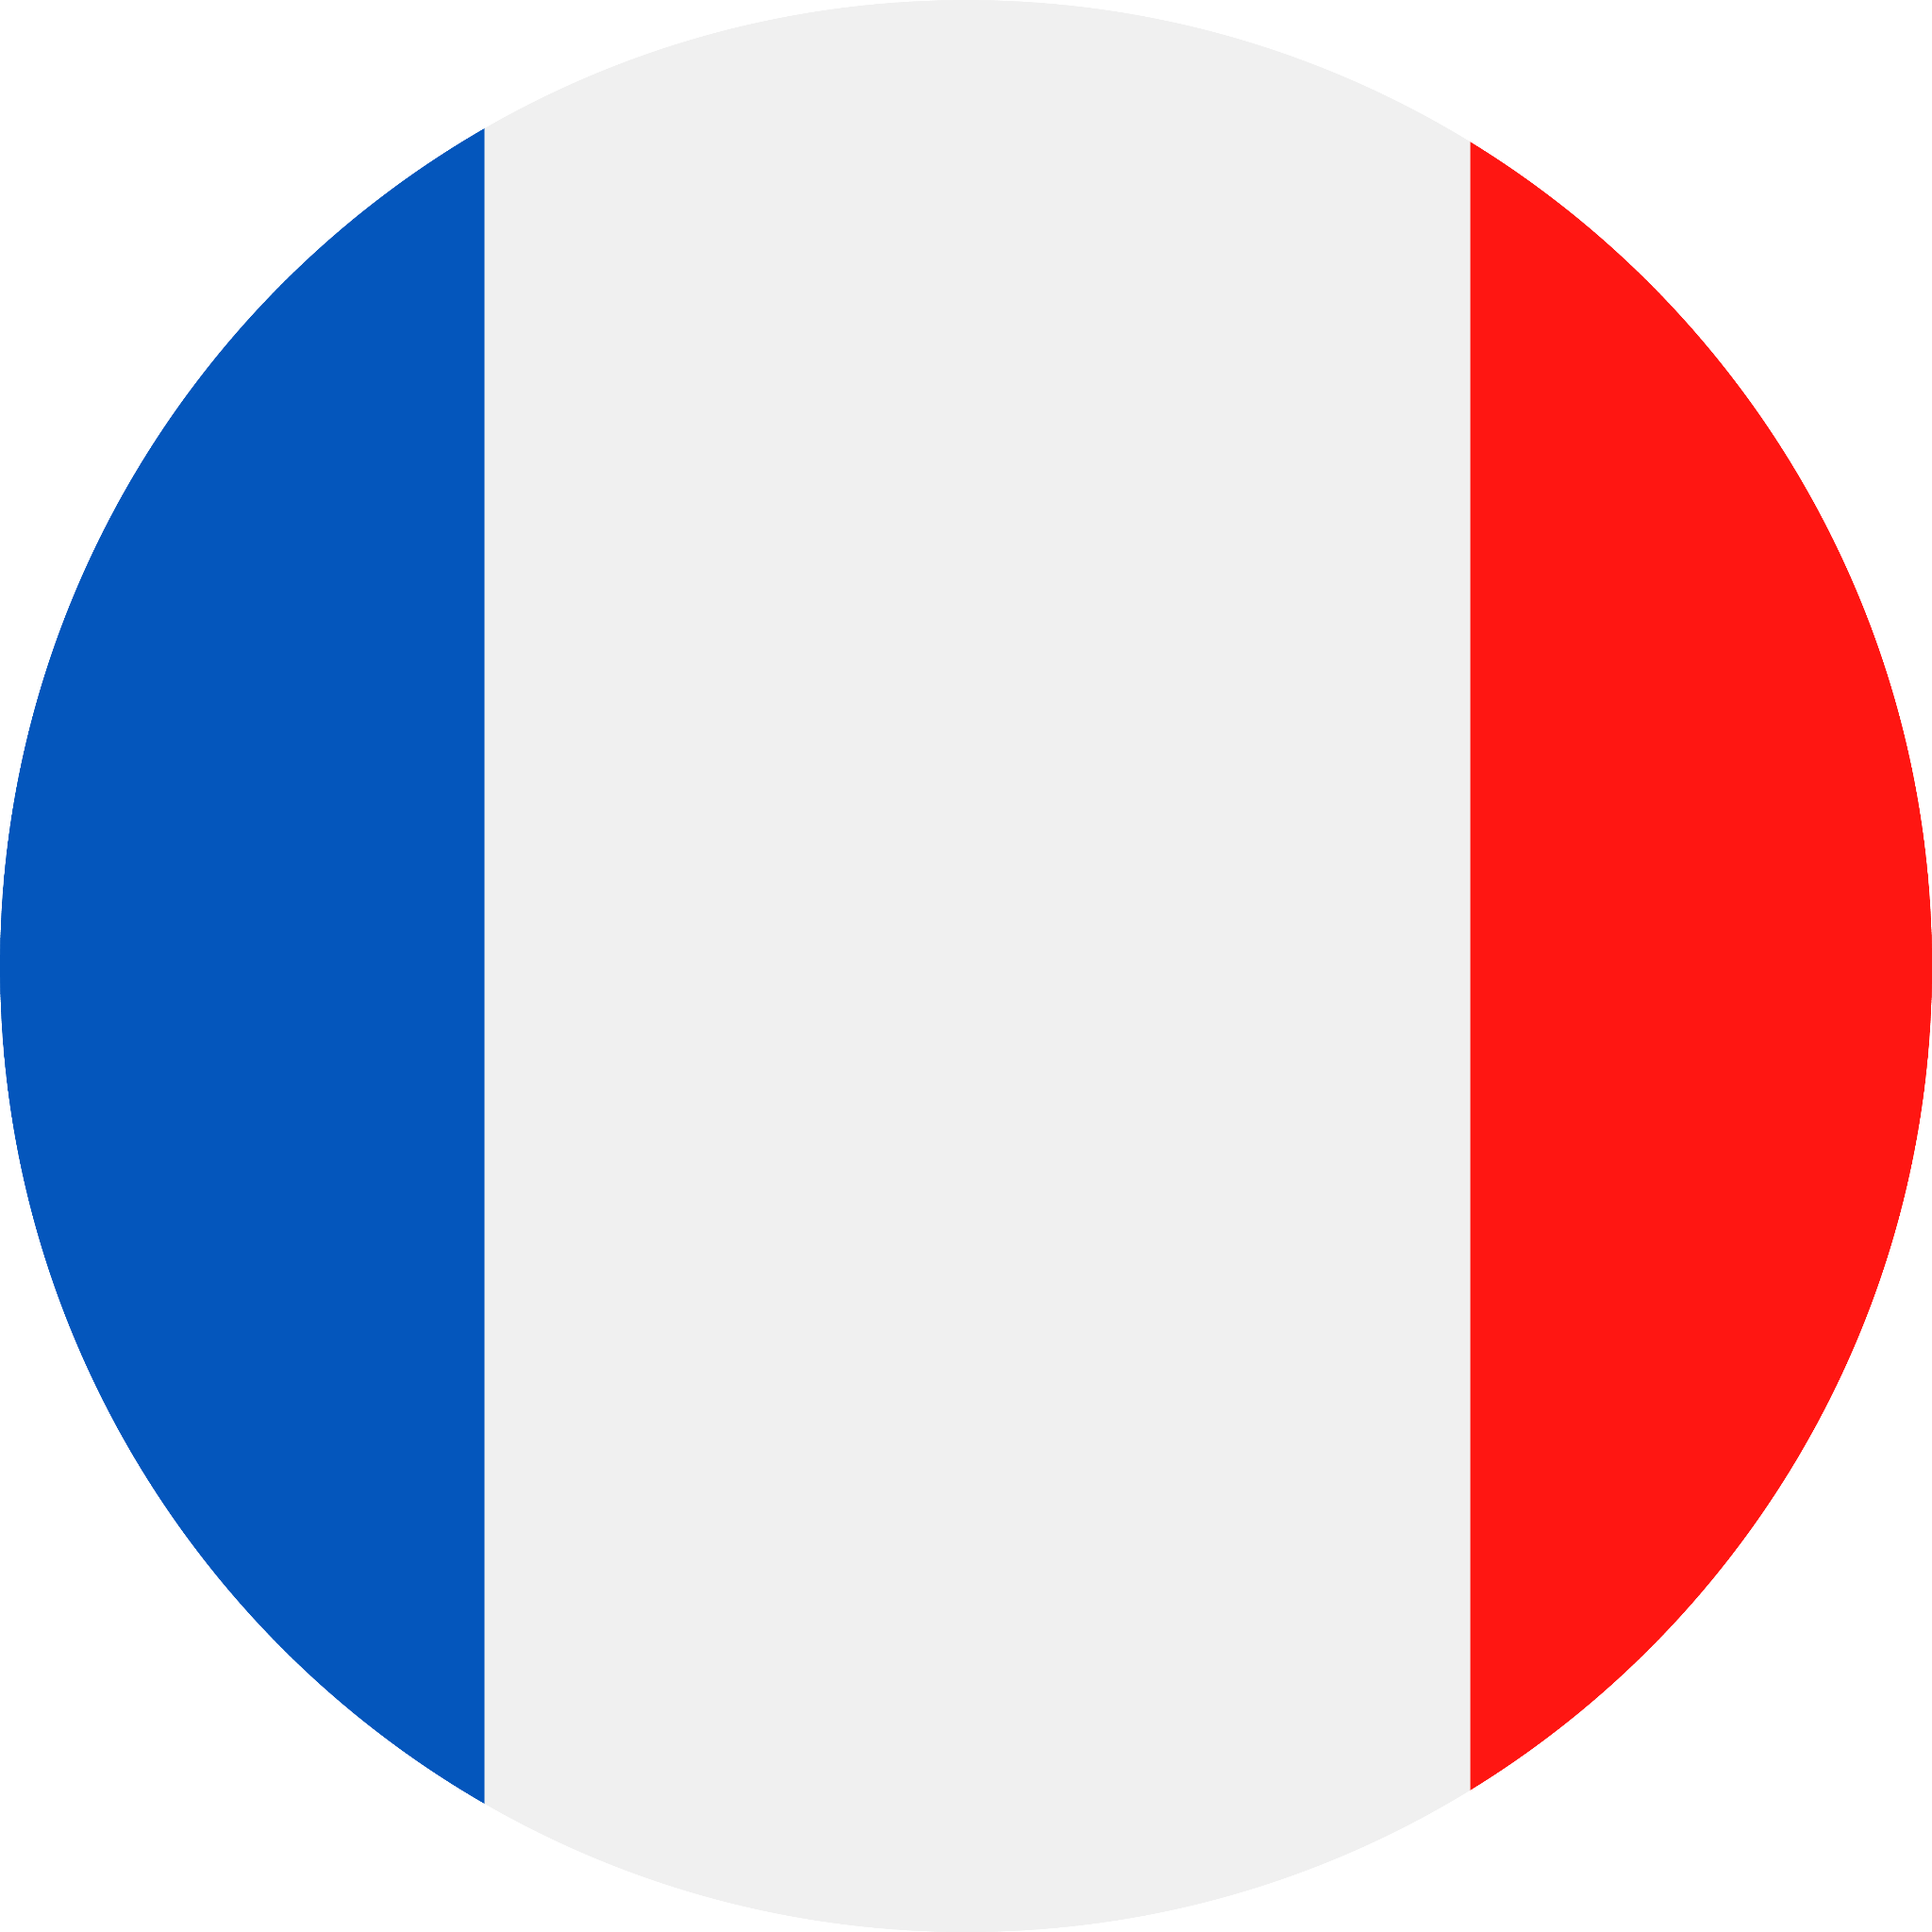 The French flag, known as the Tricolour, is a symbol of liberty, equality, and fraternity